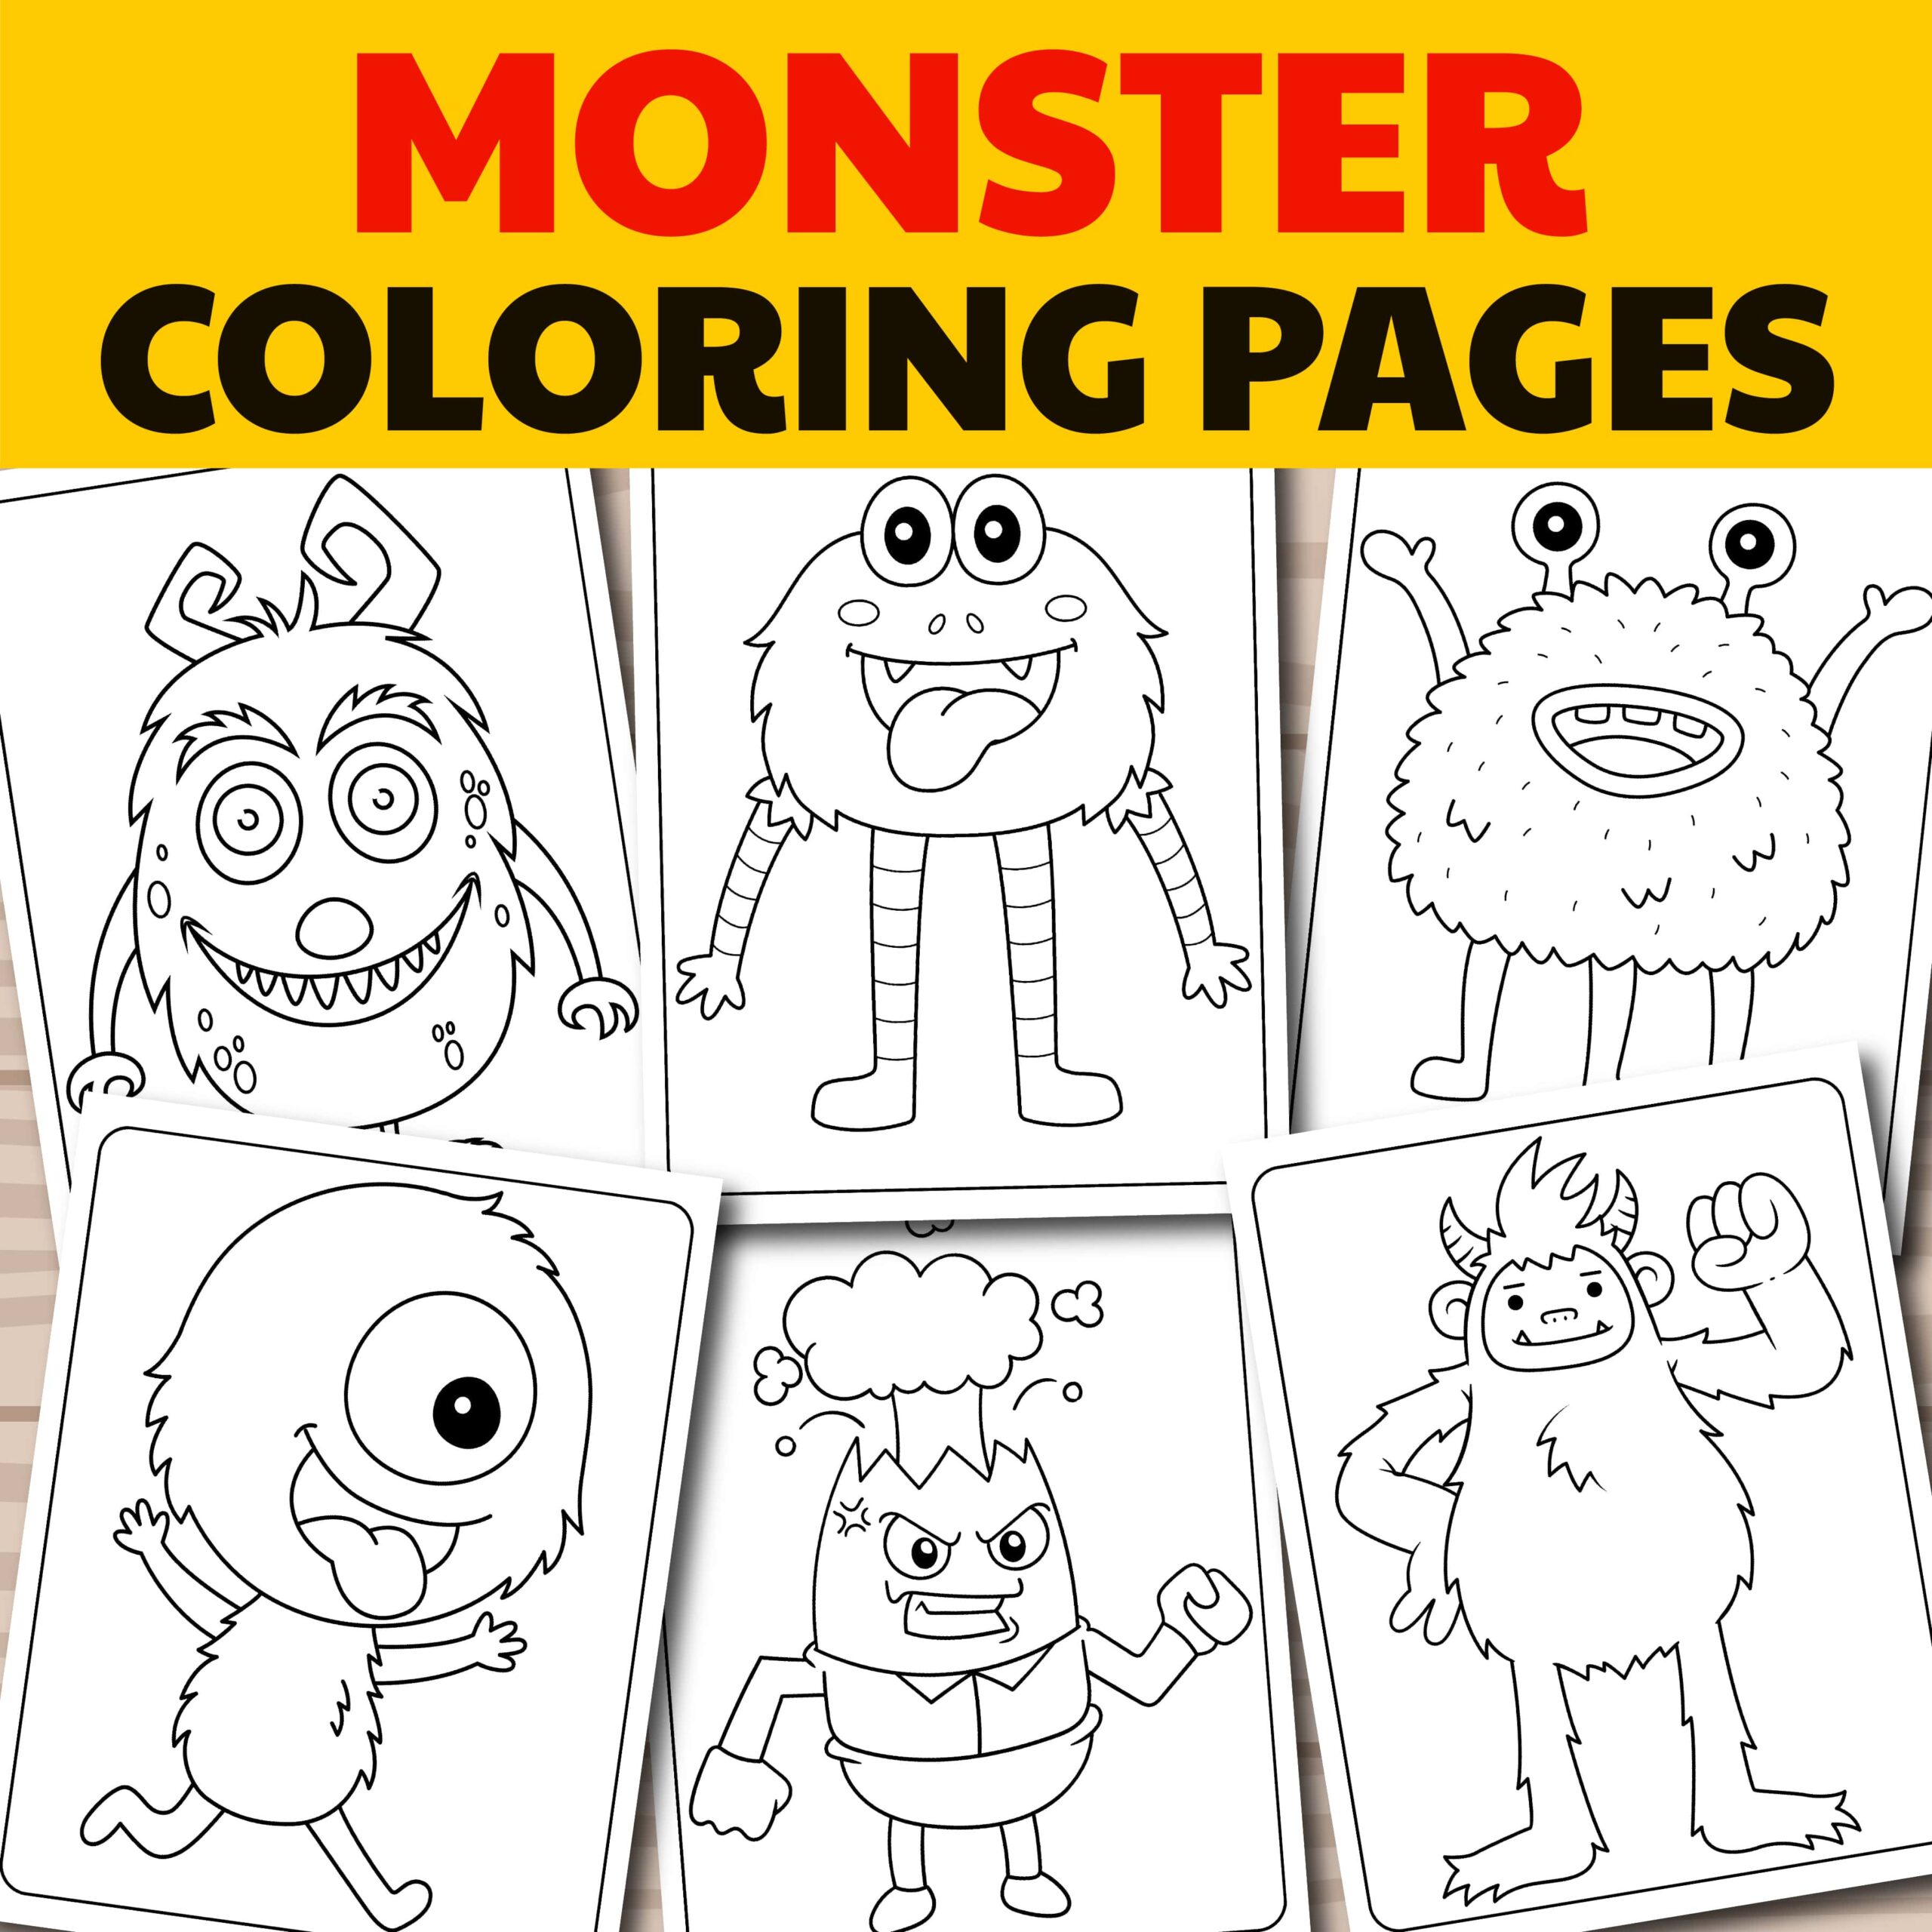 Cute monster coloring pages printable monster coloring pages for kids instant download coloring made by teachers